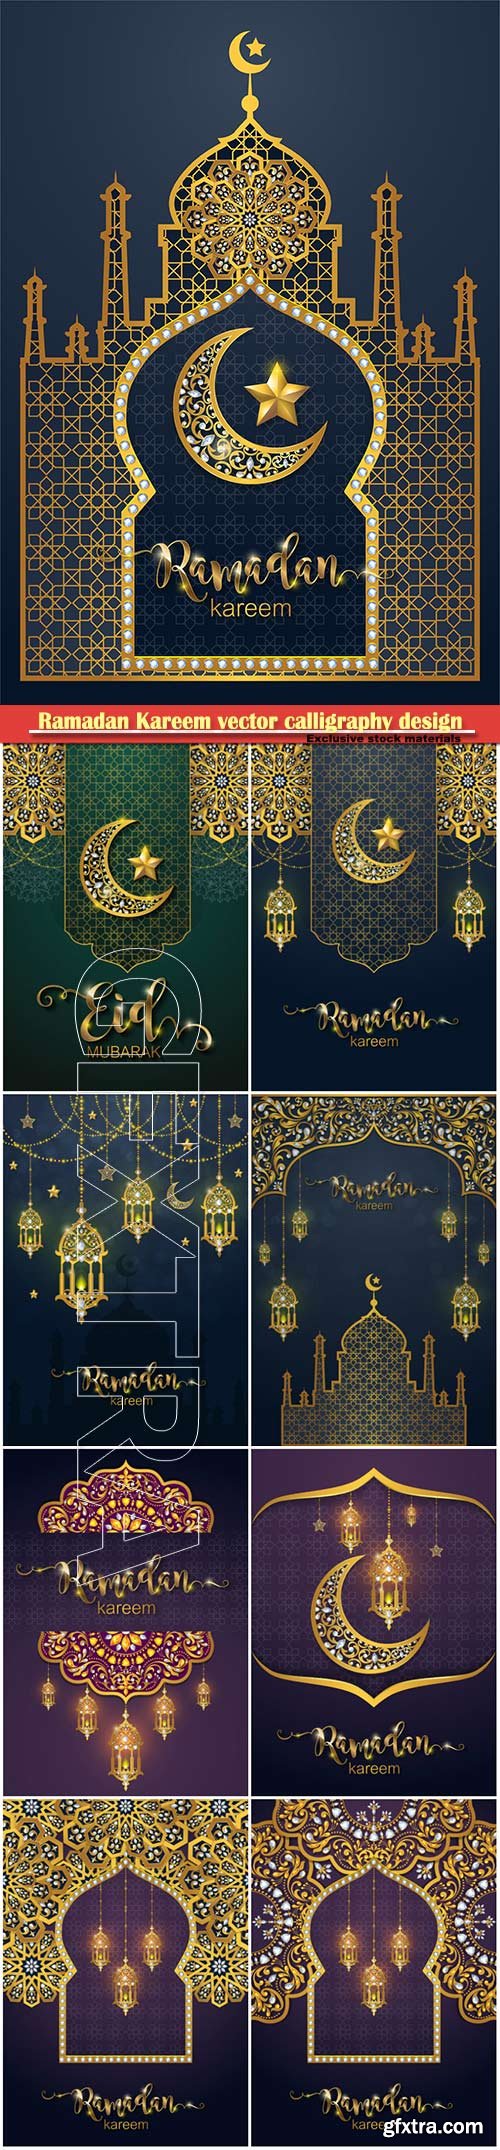 Ramadan Kareem vector calligraphy design with decorative floral pattern, mosque silhouette, crescent and glittering islamic background # 32